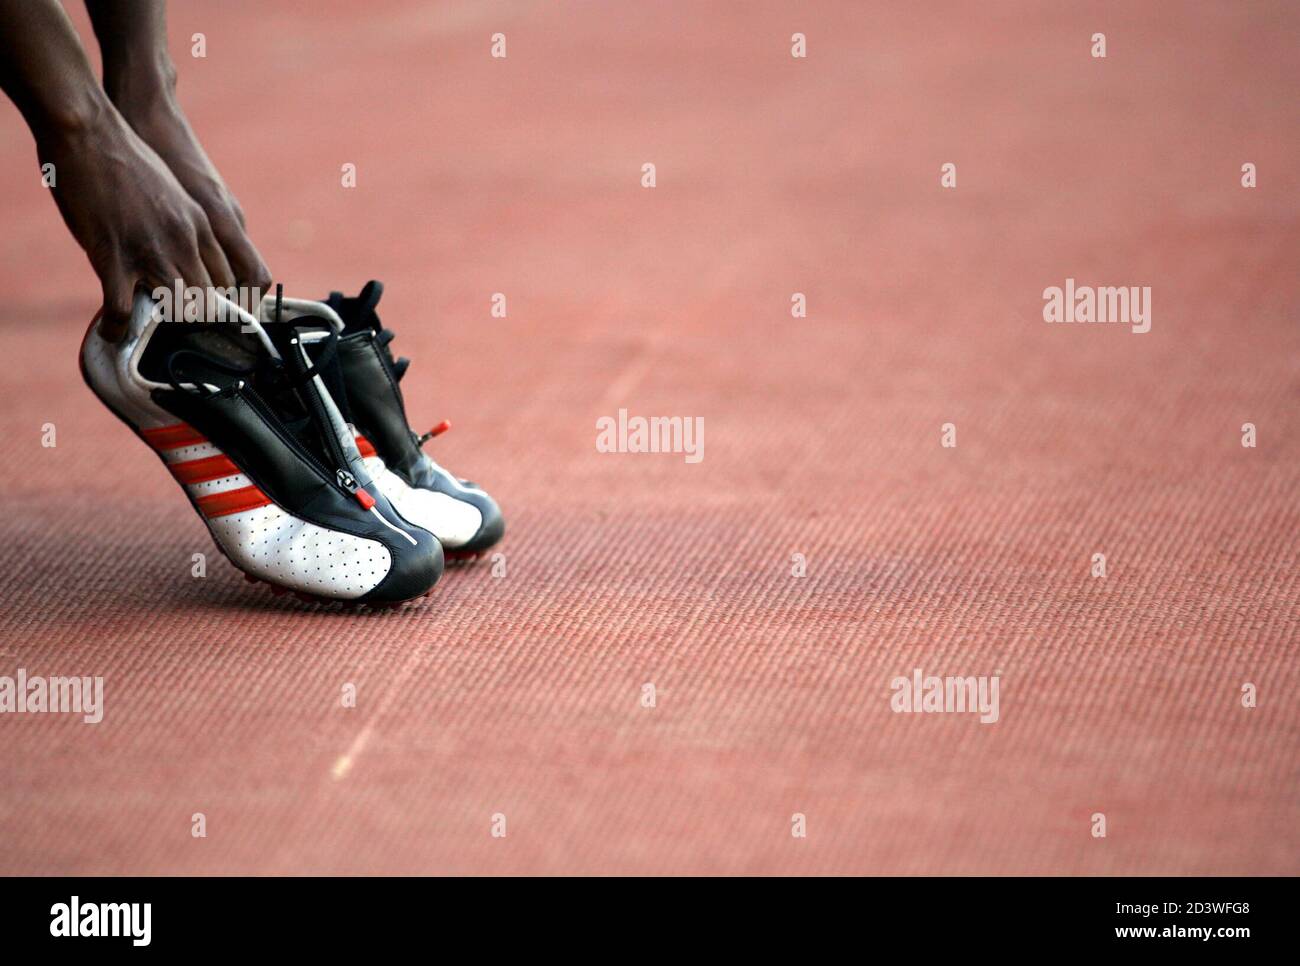 France's Sylvanie Morandais takes her training shoes after the women's 400  metres hurdles final at the XV Mediterranean Games Almeria 2005 in Almeria,  southern Spain, June 30, 2005. [Morandais finished in sixth